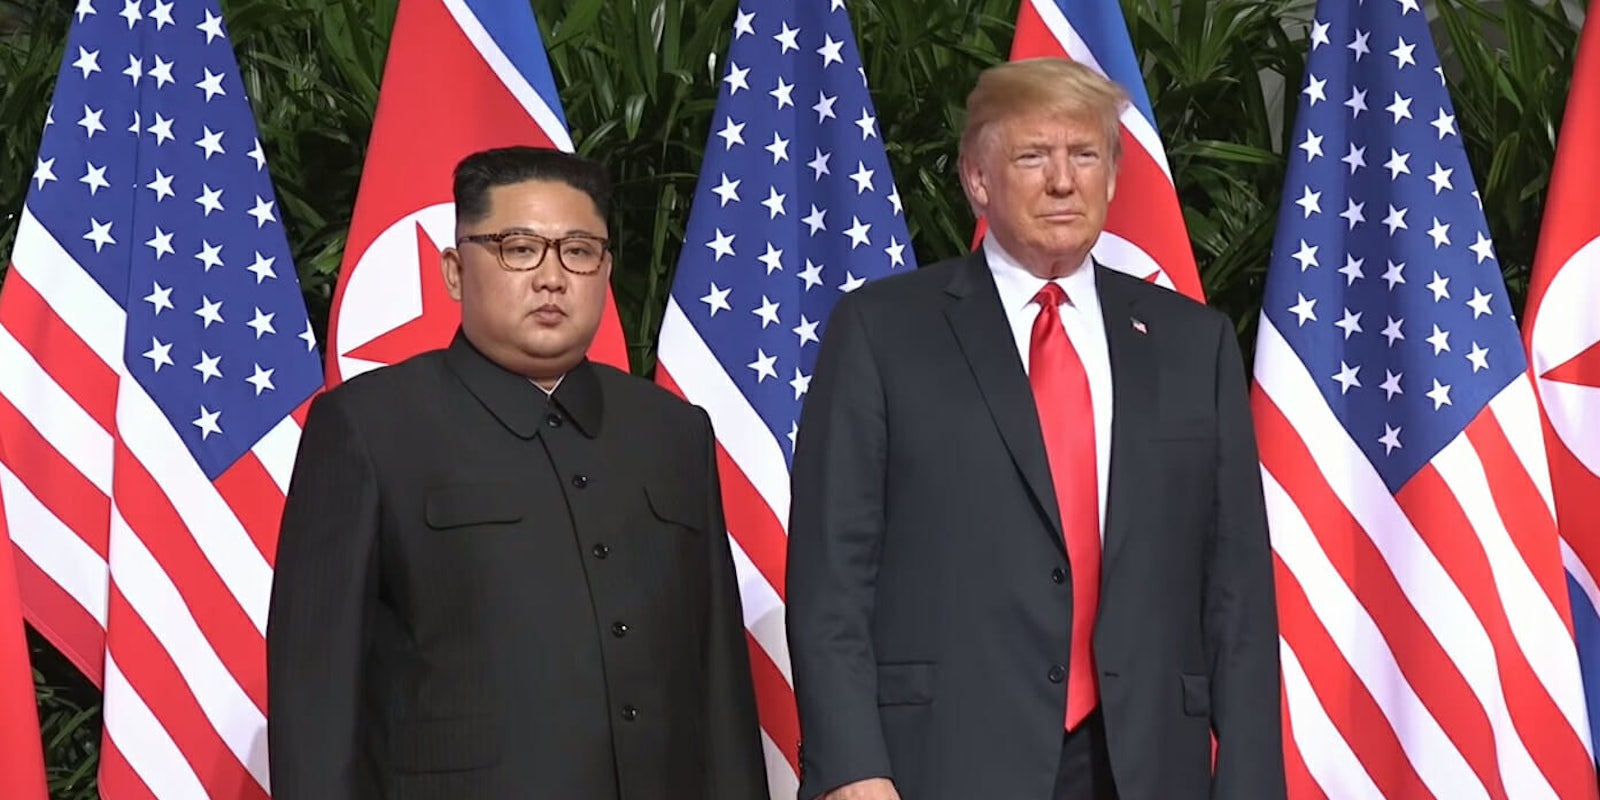 Donald Trump and North Korea signed an agreement on Tuesday aiming to denuclearize the Korean peninsula.